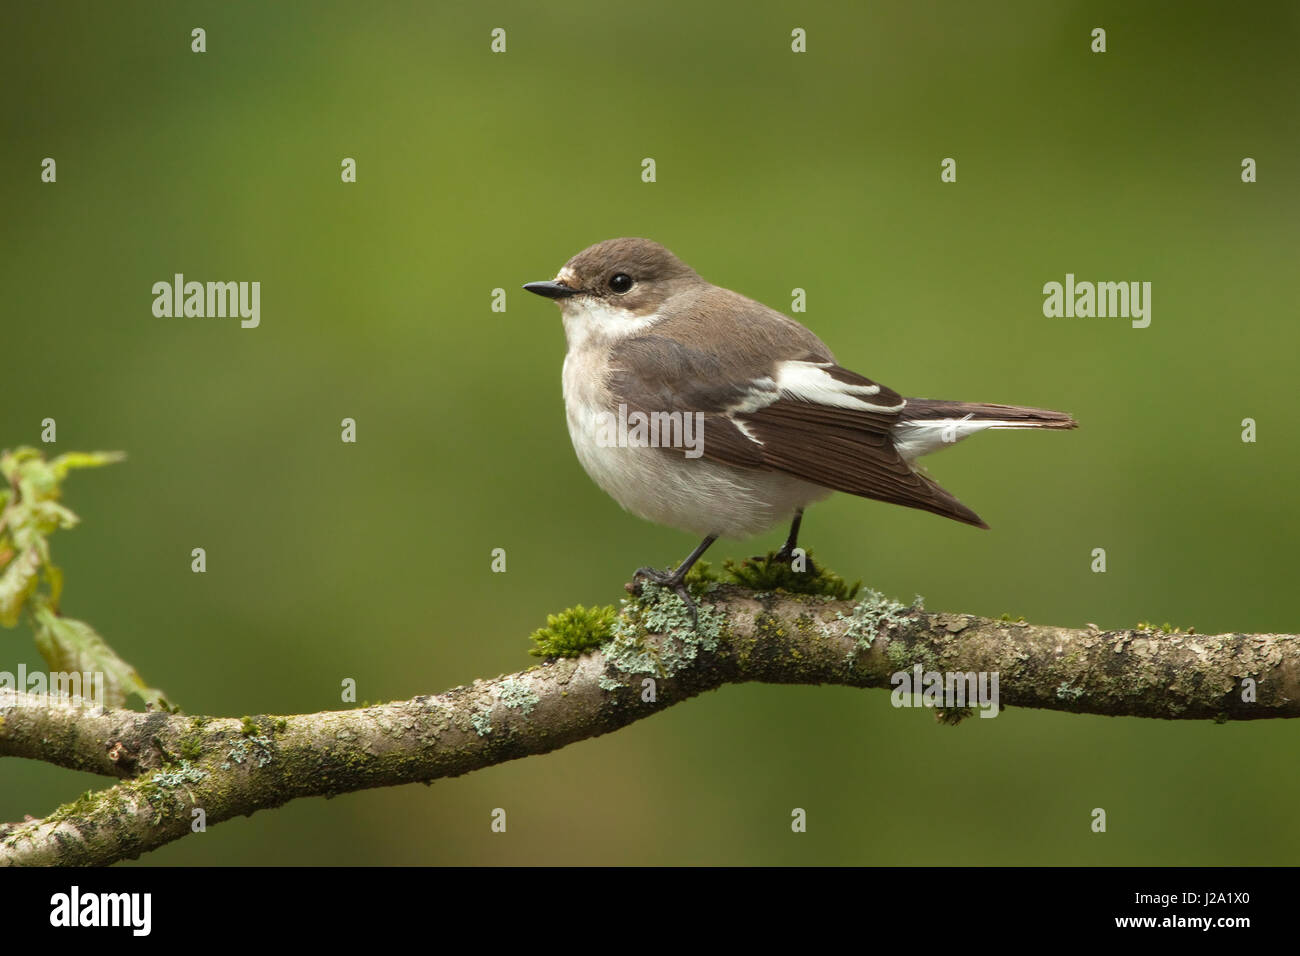 European pied flycatcher perched on branch with moss Stock Photo